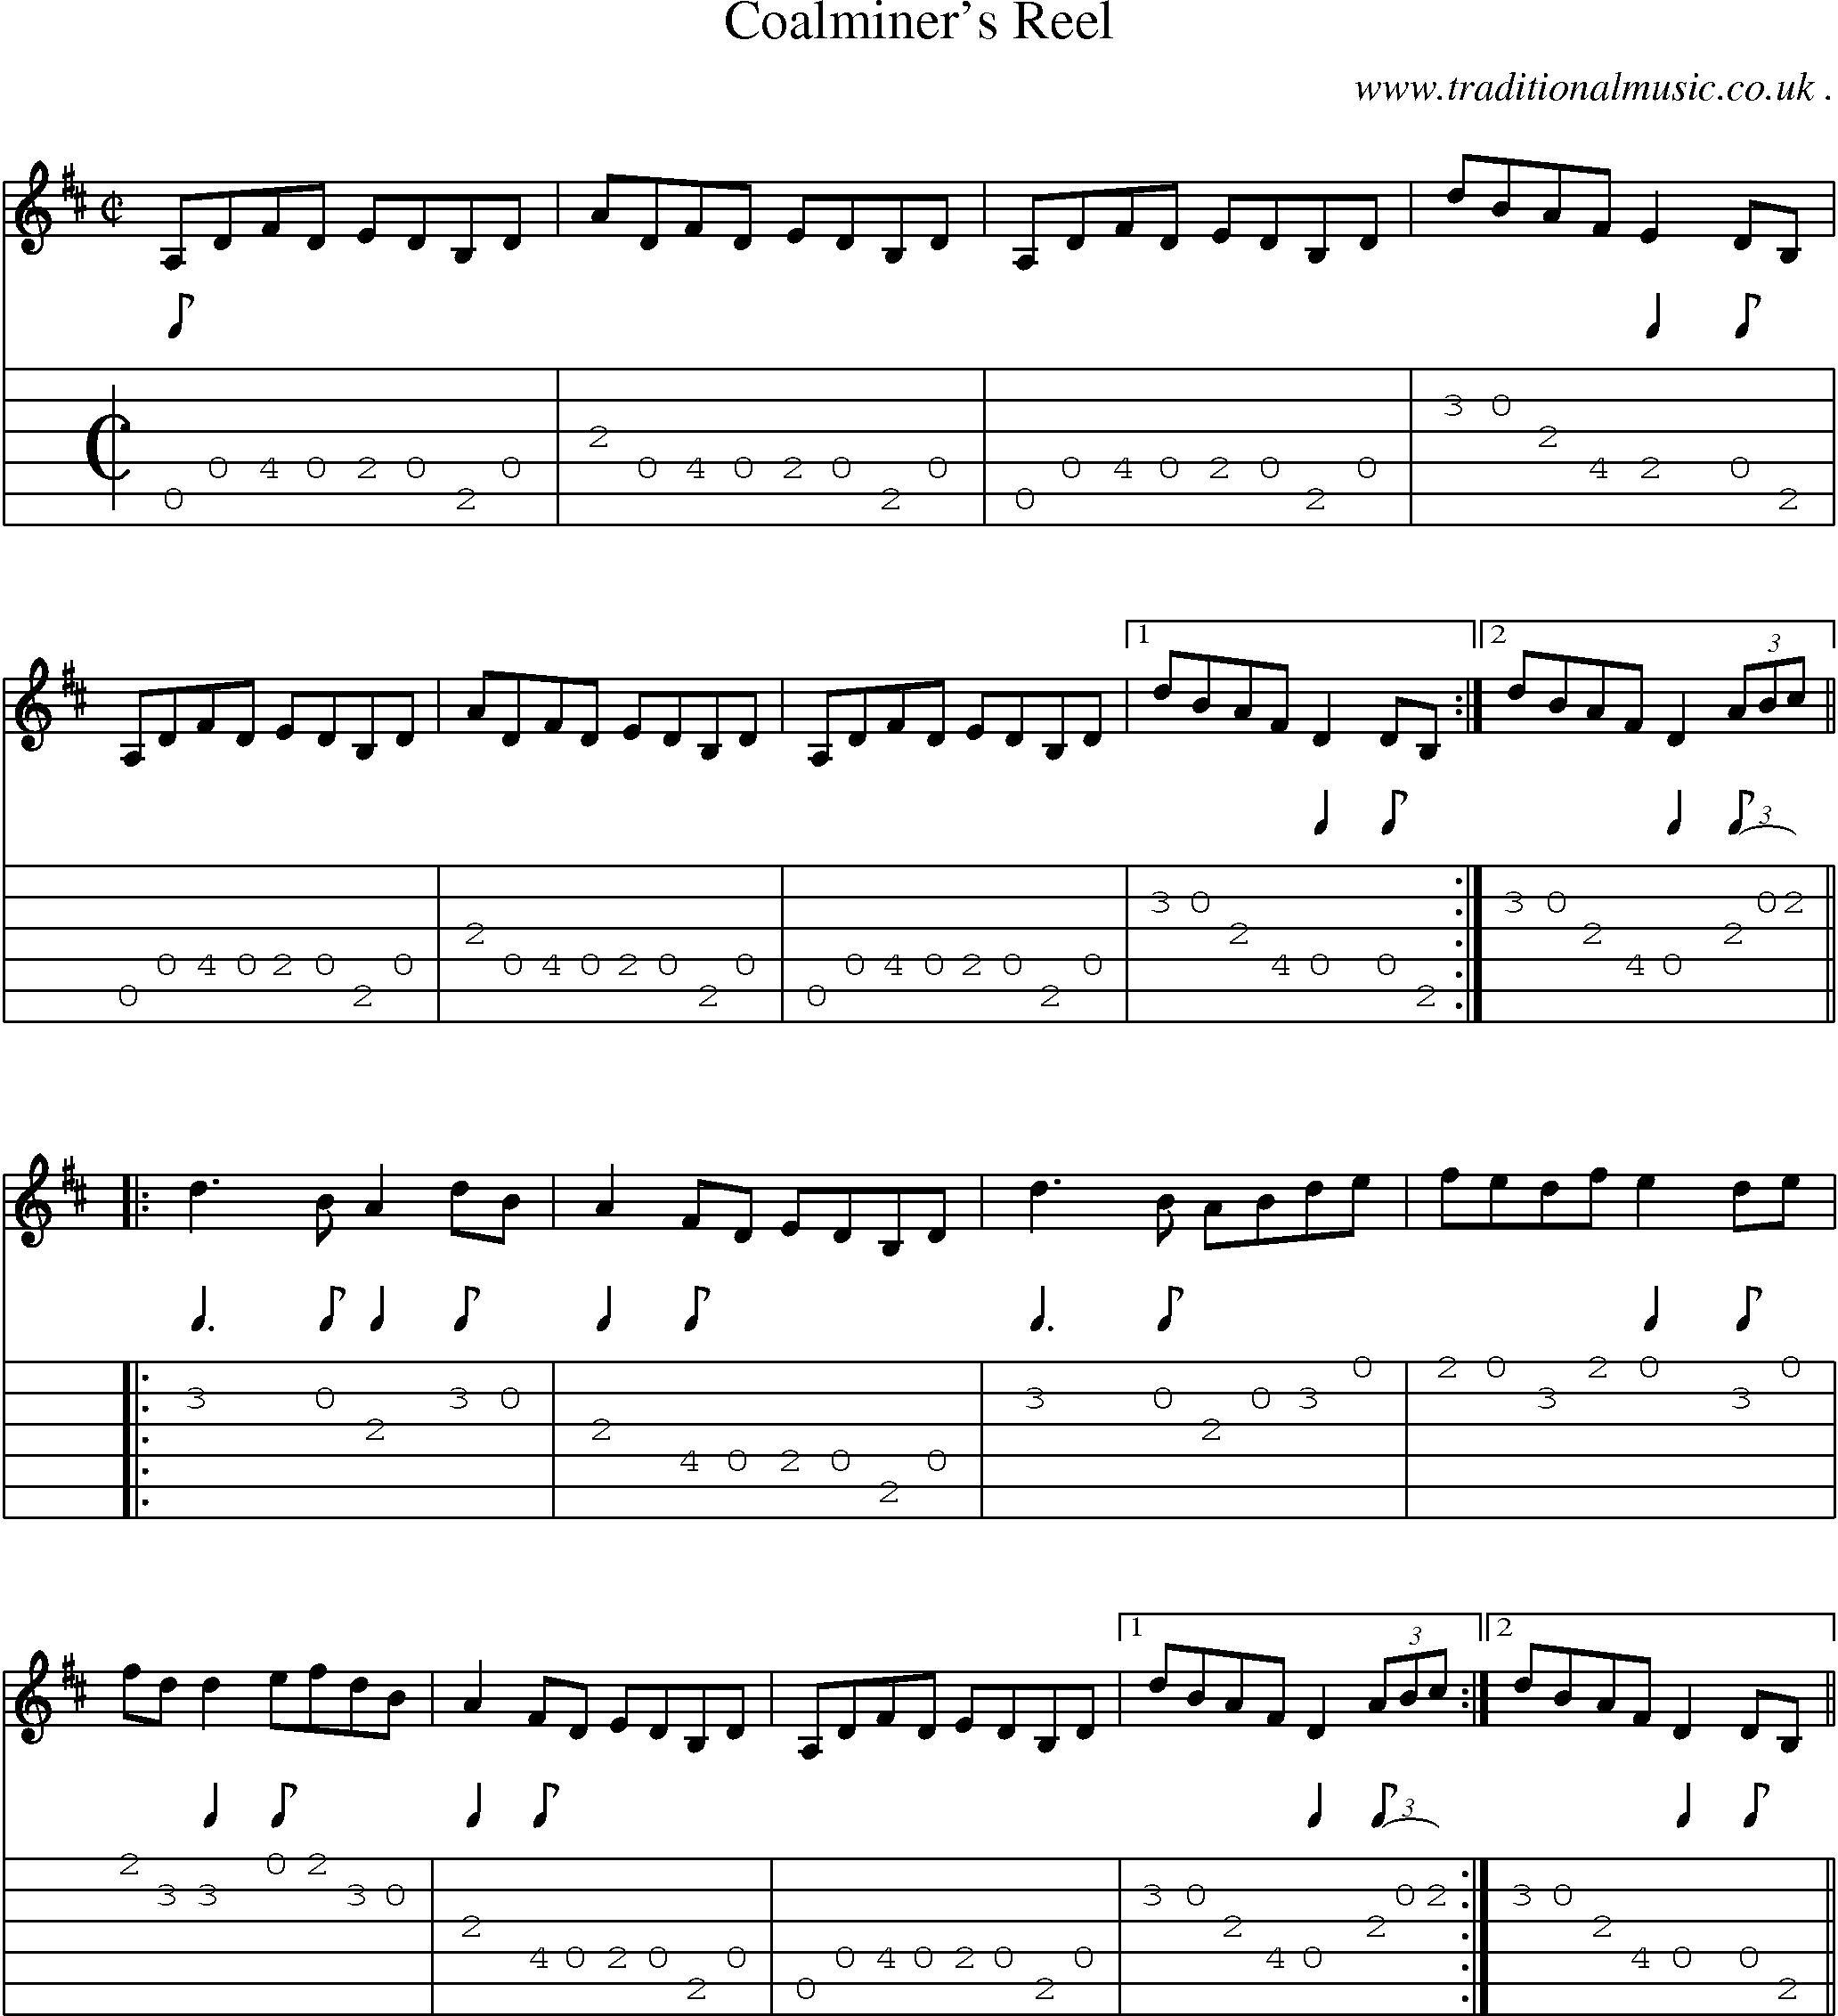 Sheet-Music and Guitar Tabs for Coalminers Reel